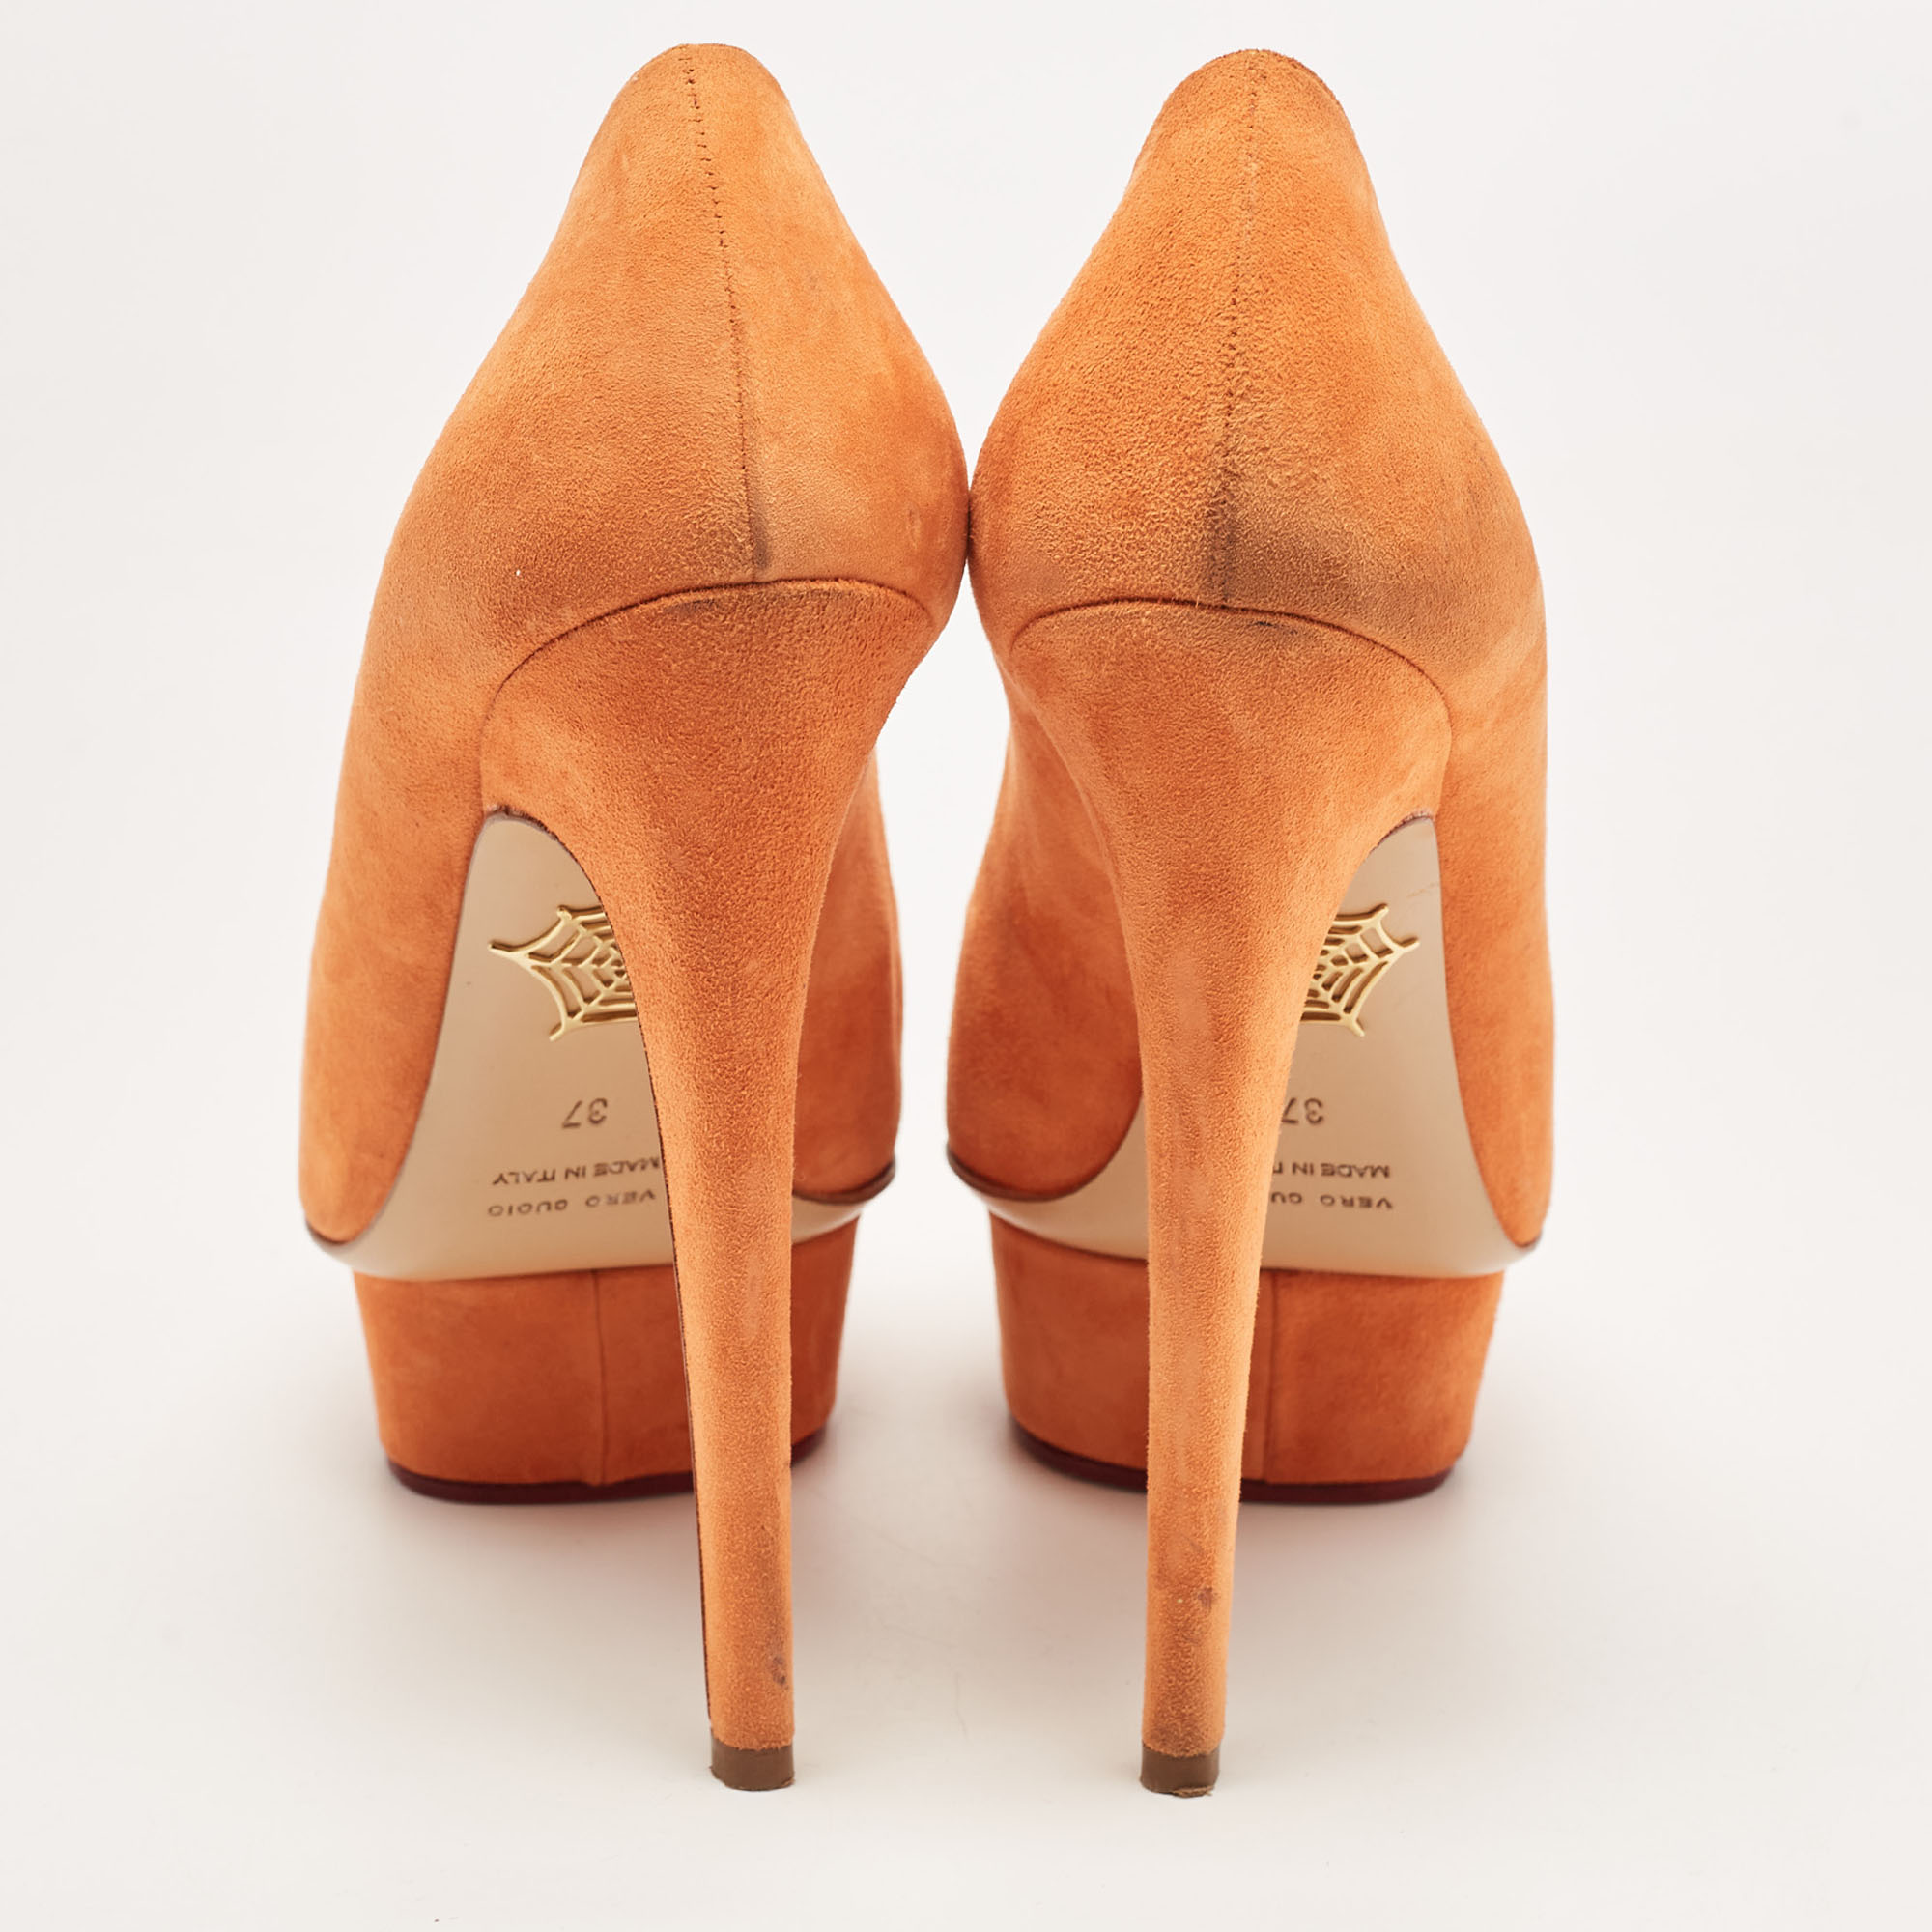 Charlotte Olympia Orange Suede Dolly Pumps Size 37